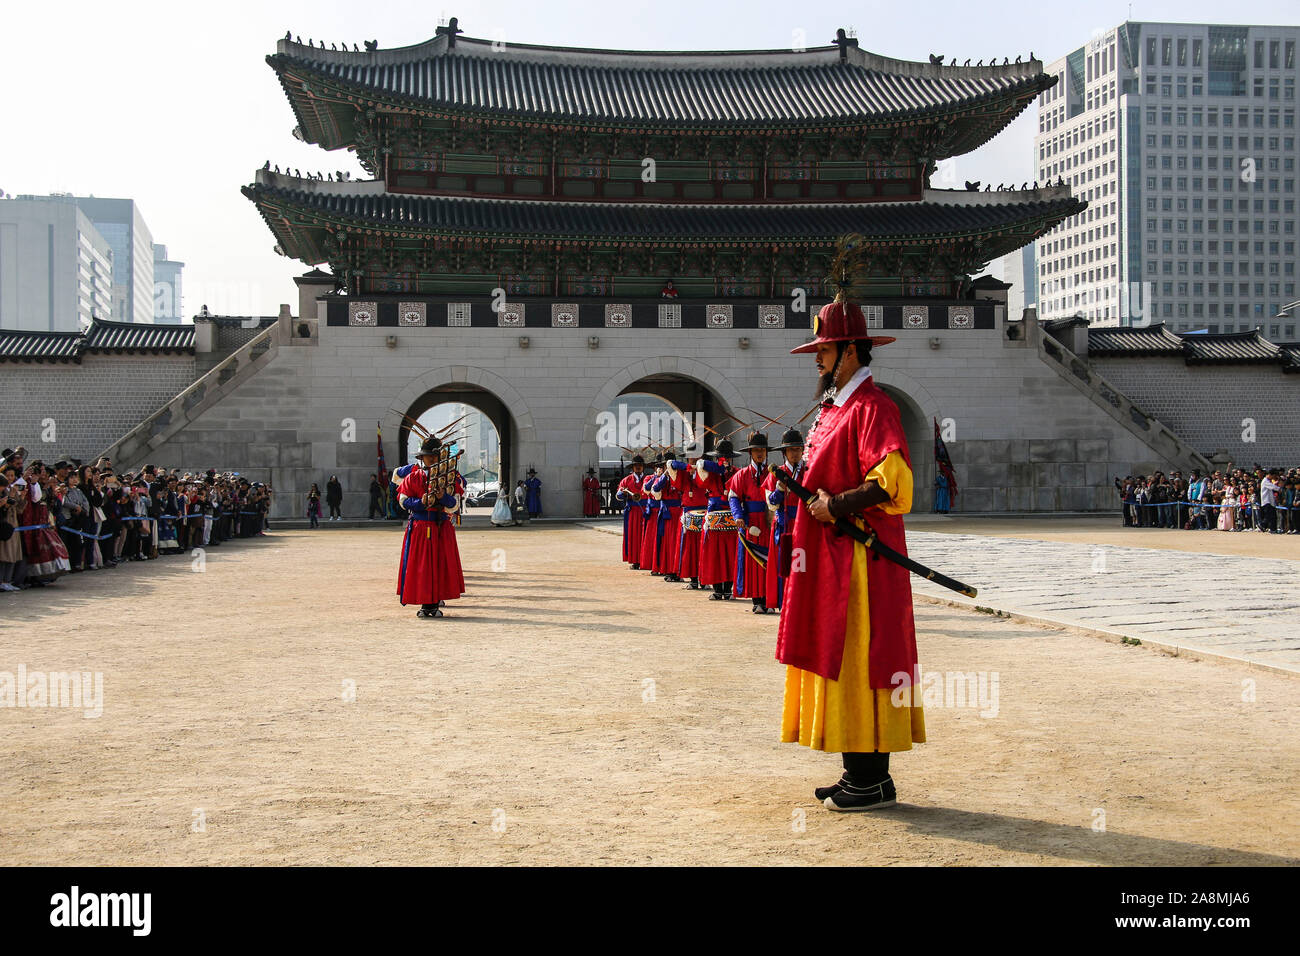 SEOUL, SOUTH KOREA - OCTOBER 20, 2019: The changing of the guard demonstration at Gyeongbokgung Palace in Seoul, South Korea Stock Photo